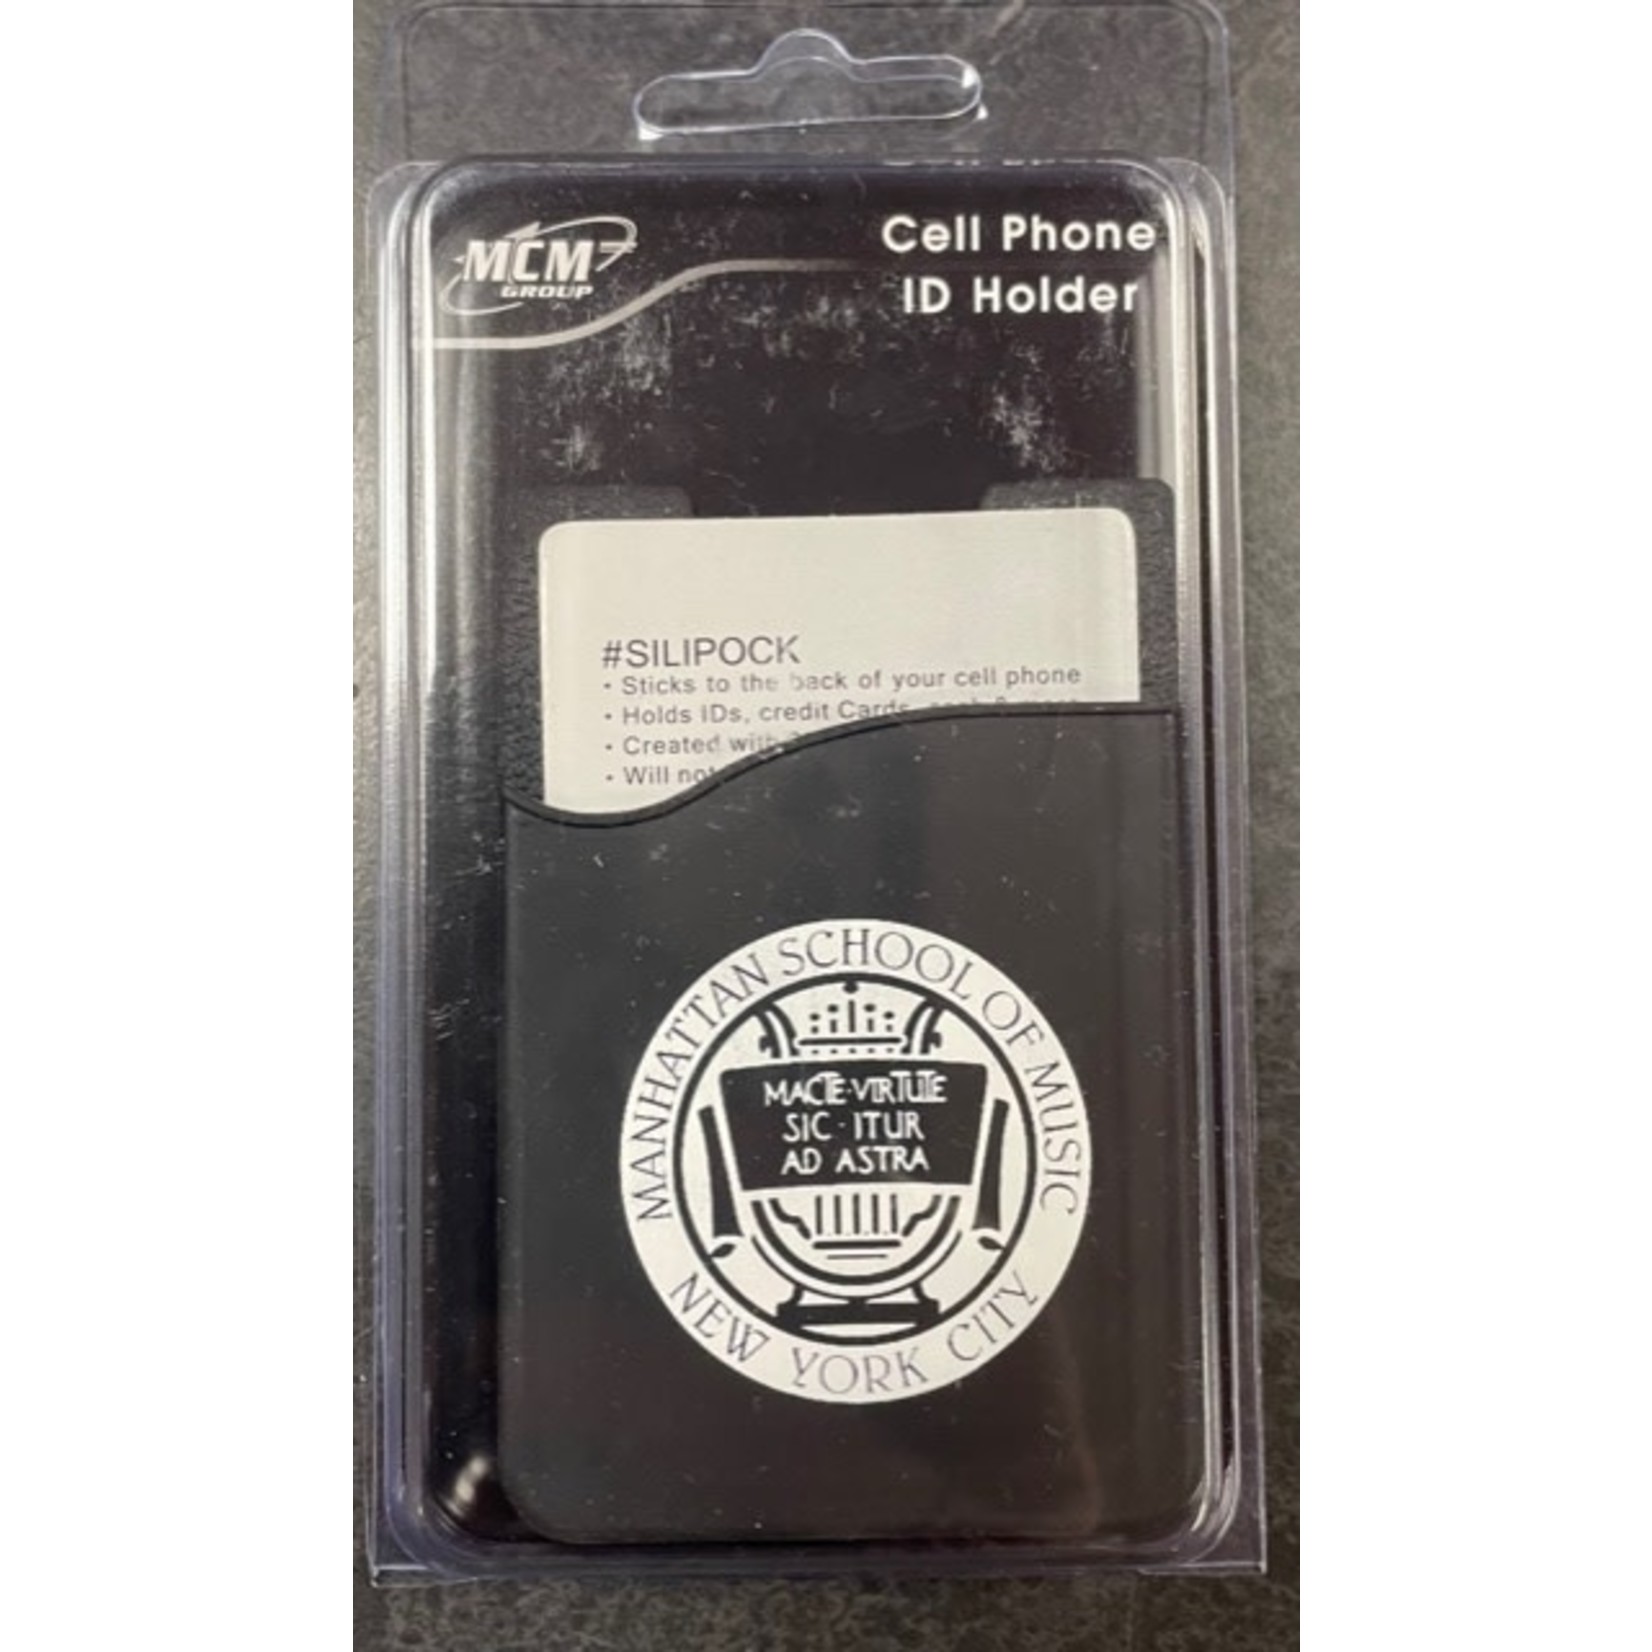 Cell Phone ID Holder MSM seal